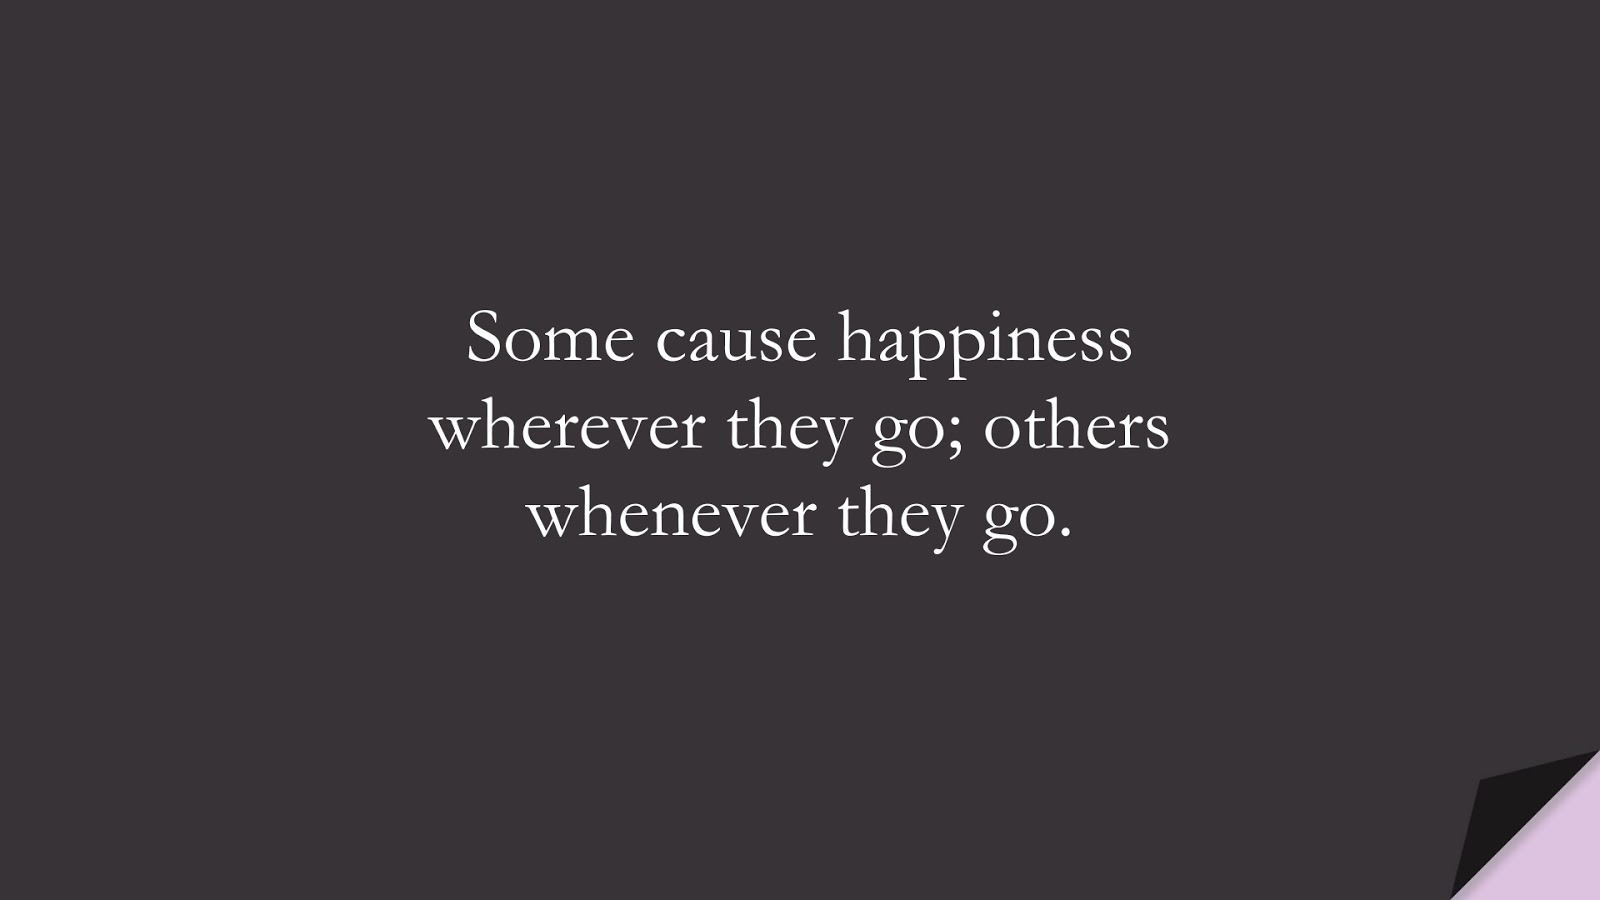 Some cause happiness wherever they go; others whenever they go.FALSE